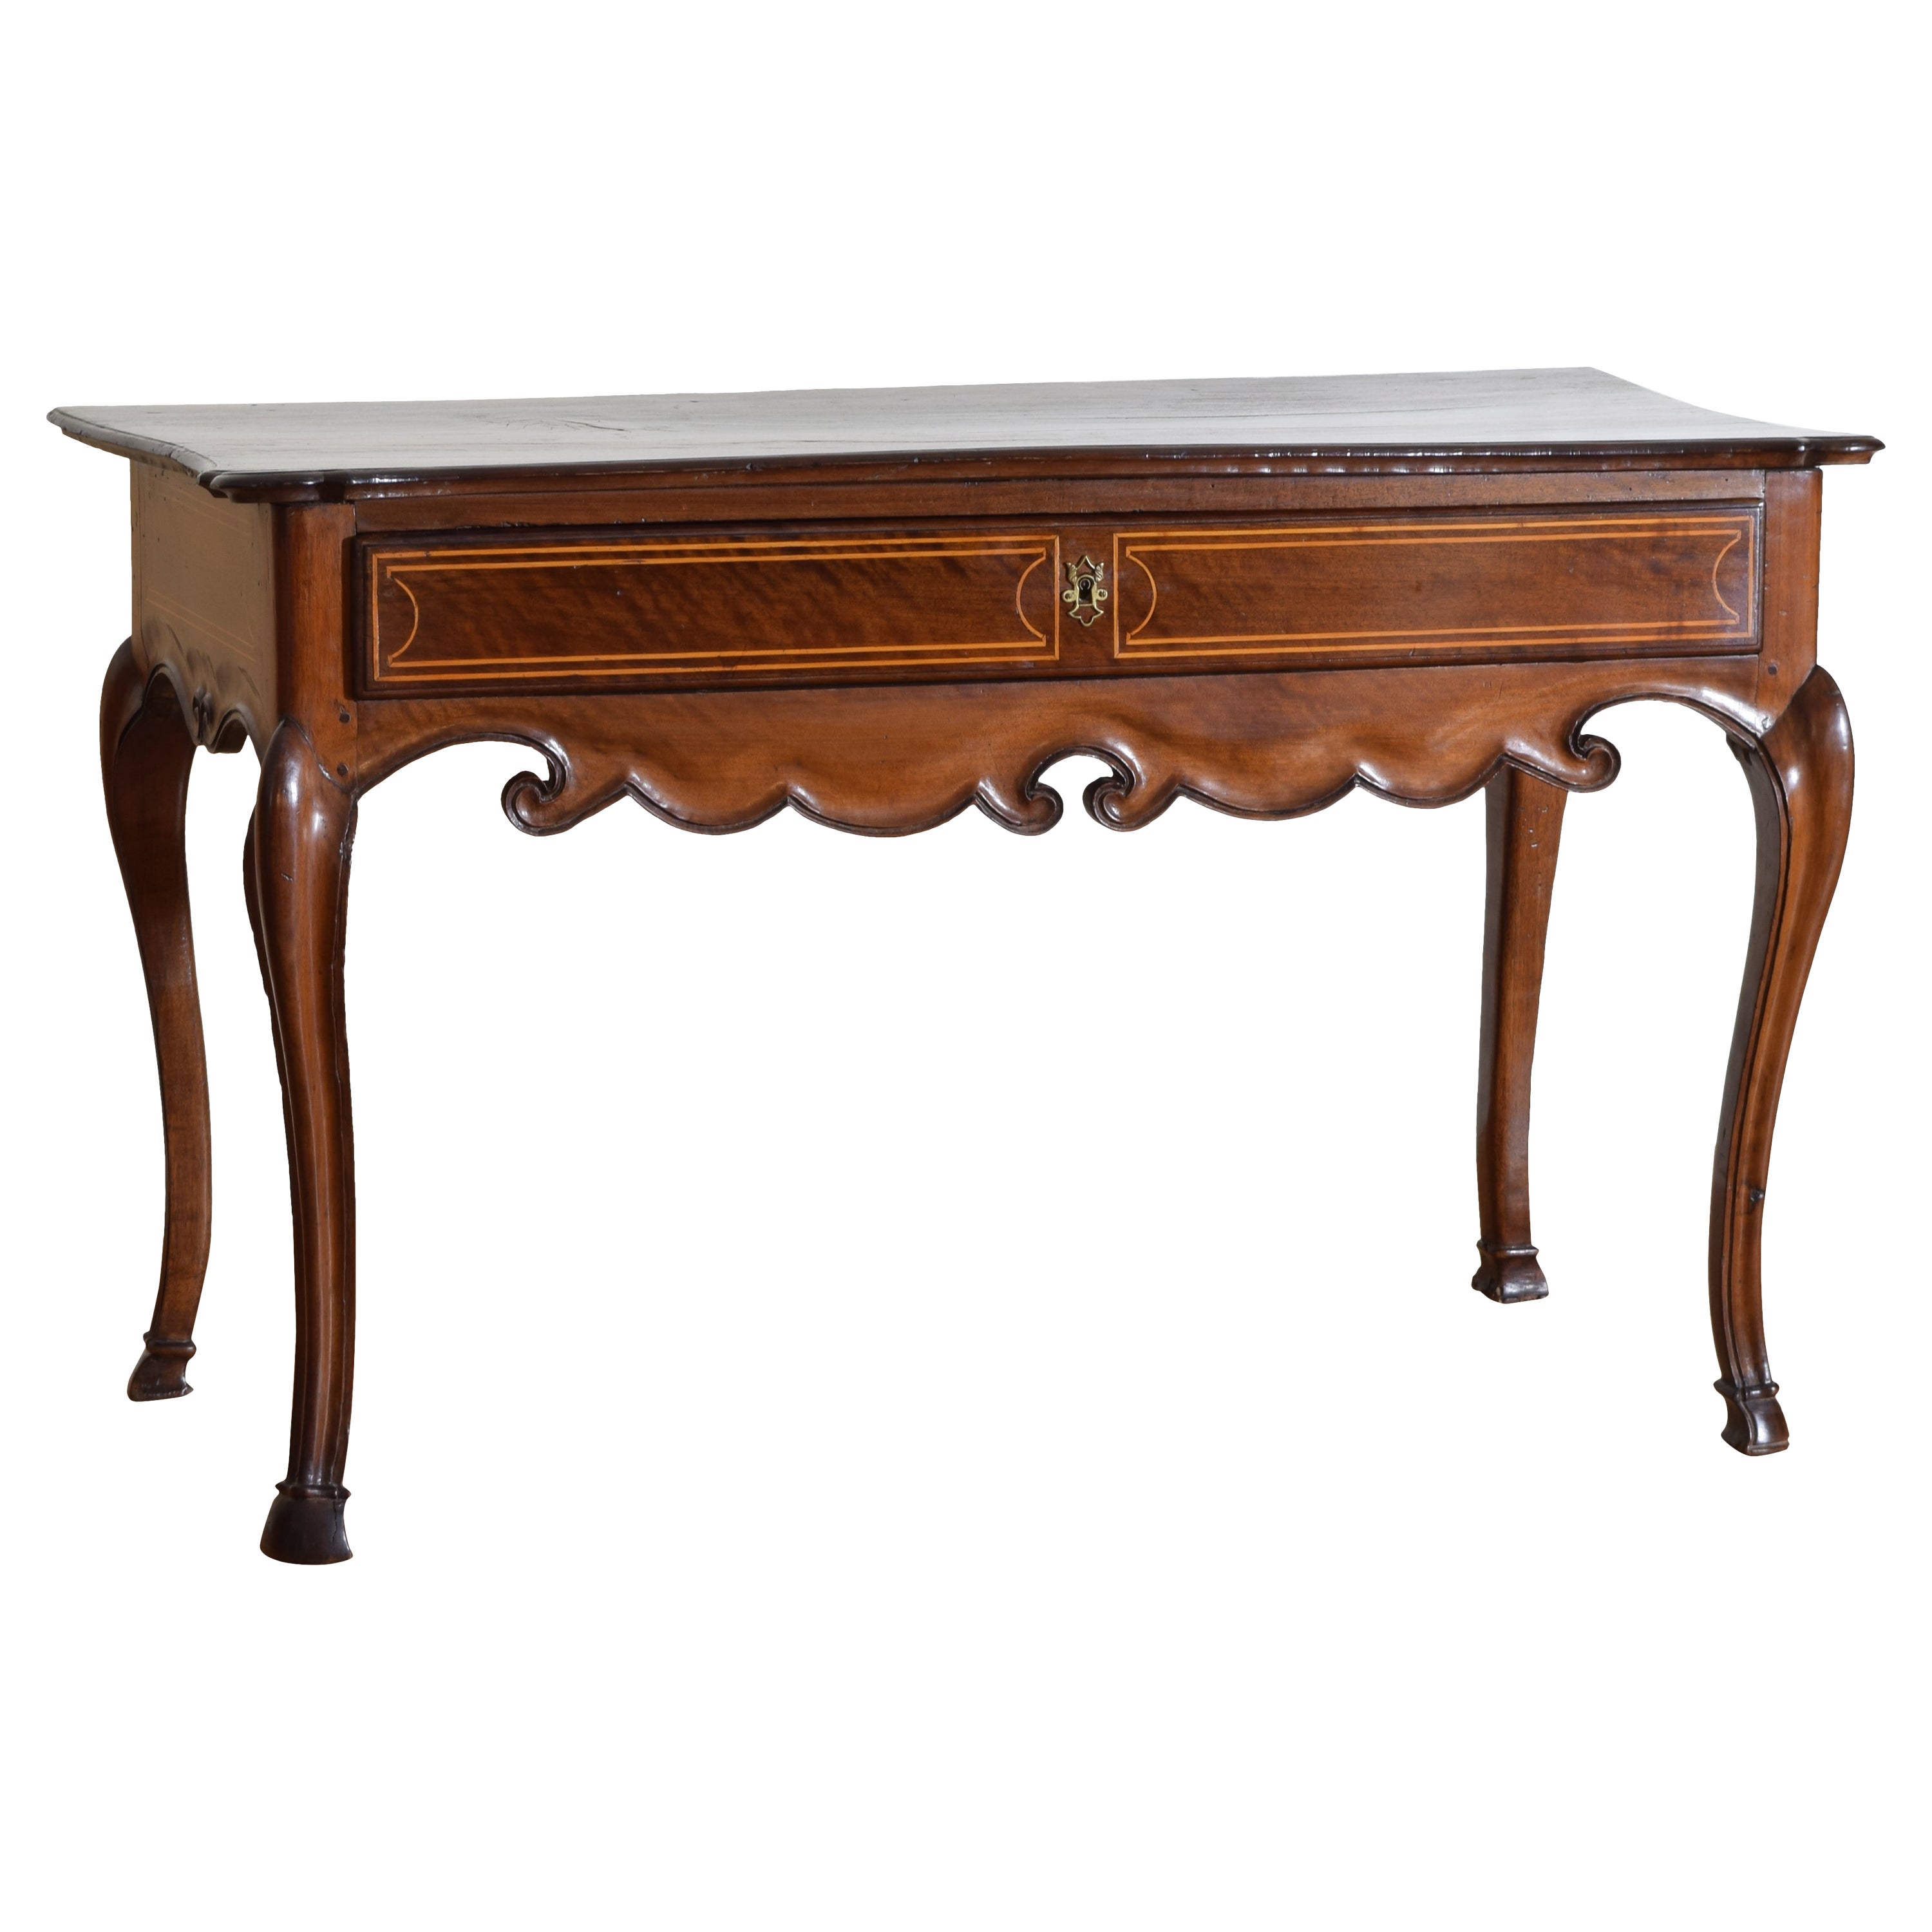 Portuguese Rococo Period Carved Walnut & Inlaid 1-Drawer Console, mid 18th cen. For Sale